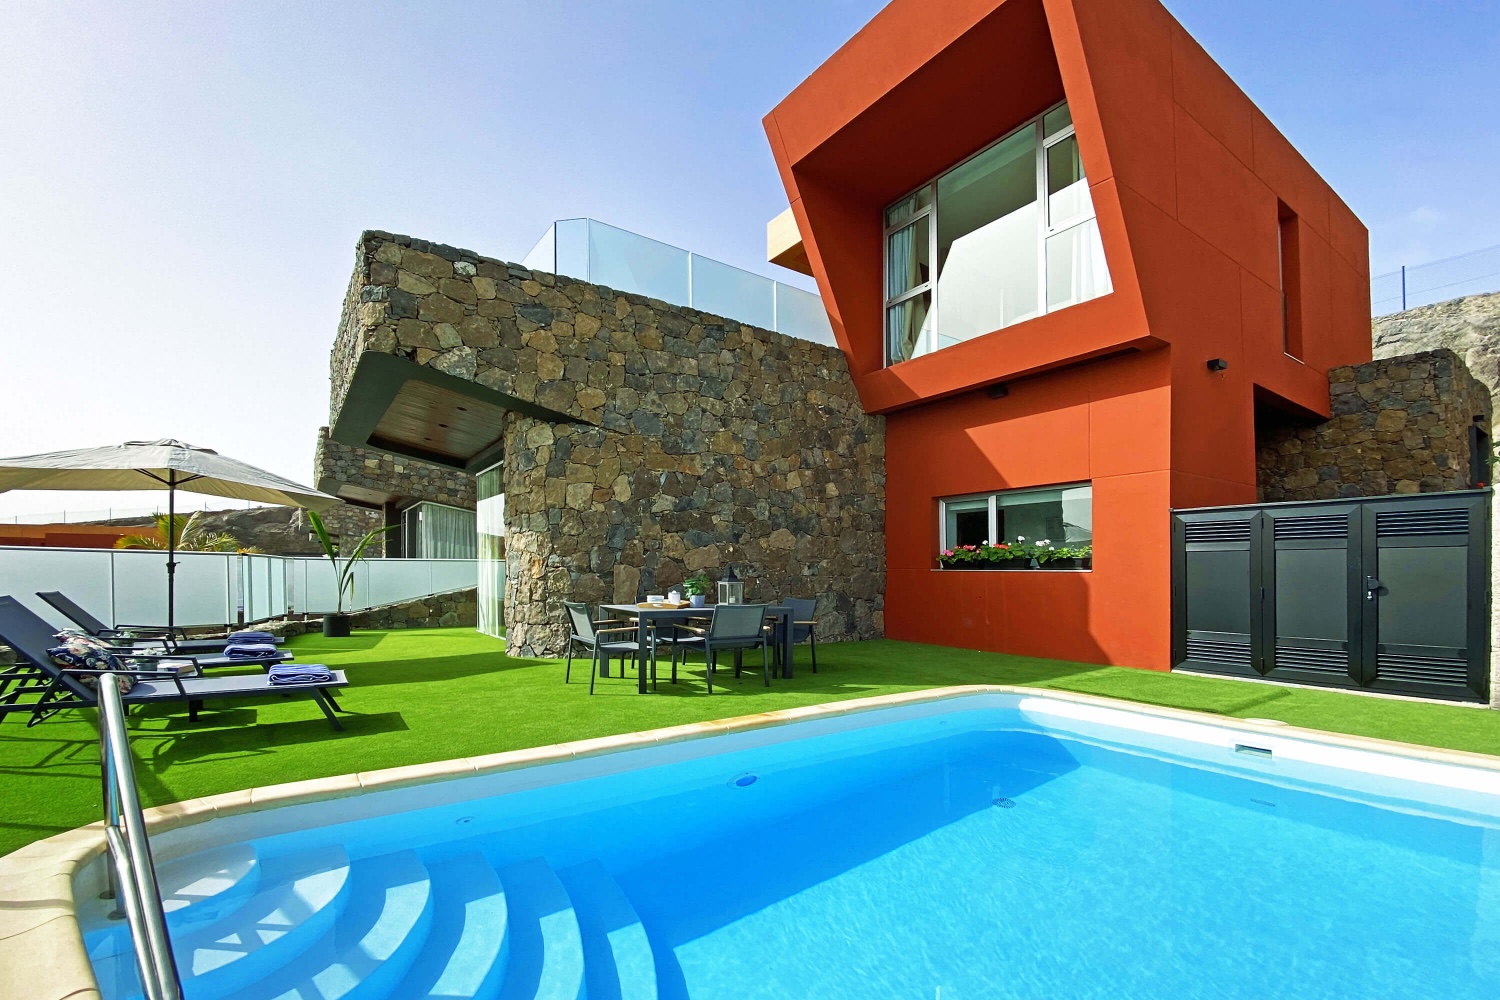 Modern and bright villa, fully equipped, perfect for enjoying the good weather in the south of Gran Canaria in a unique setting.